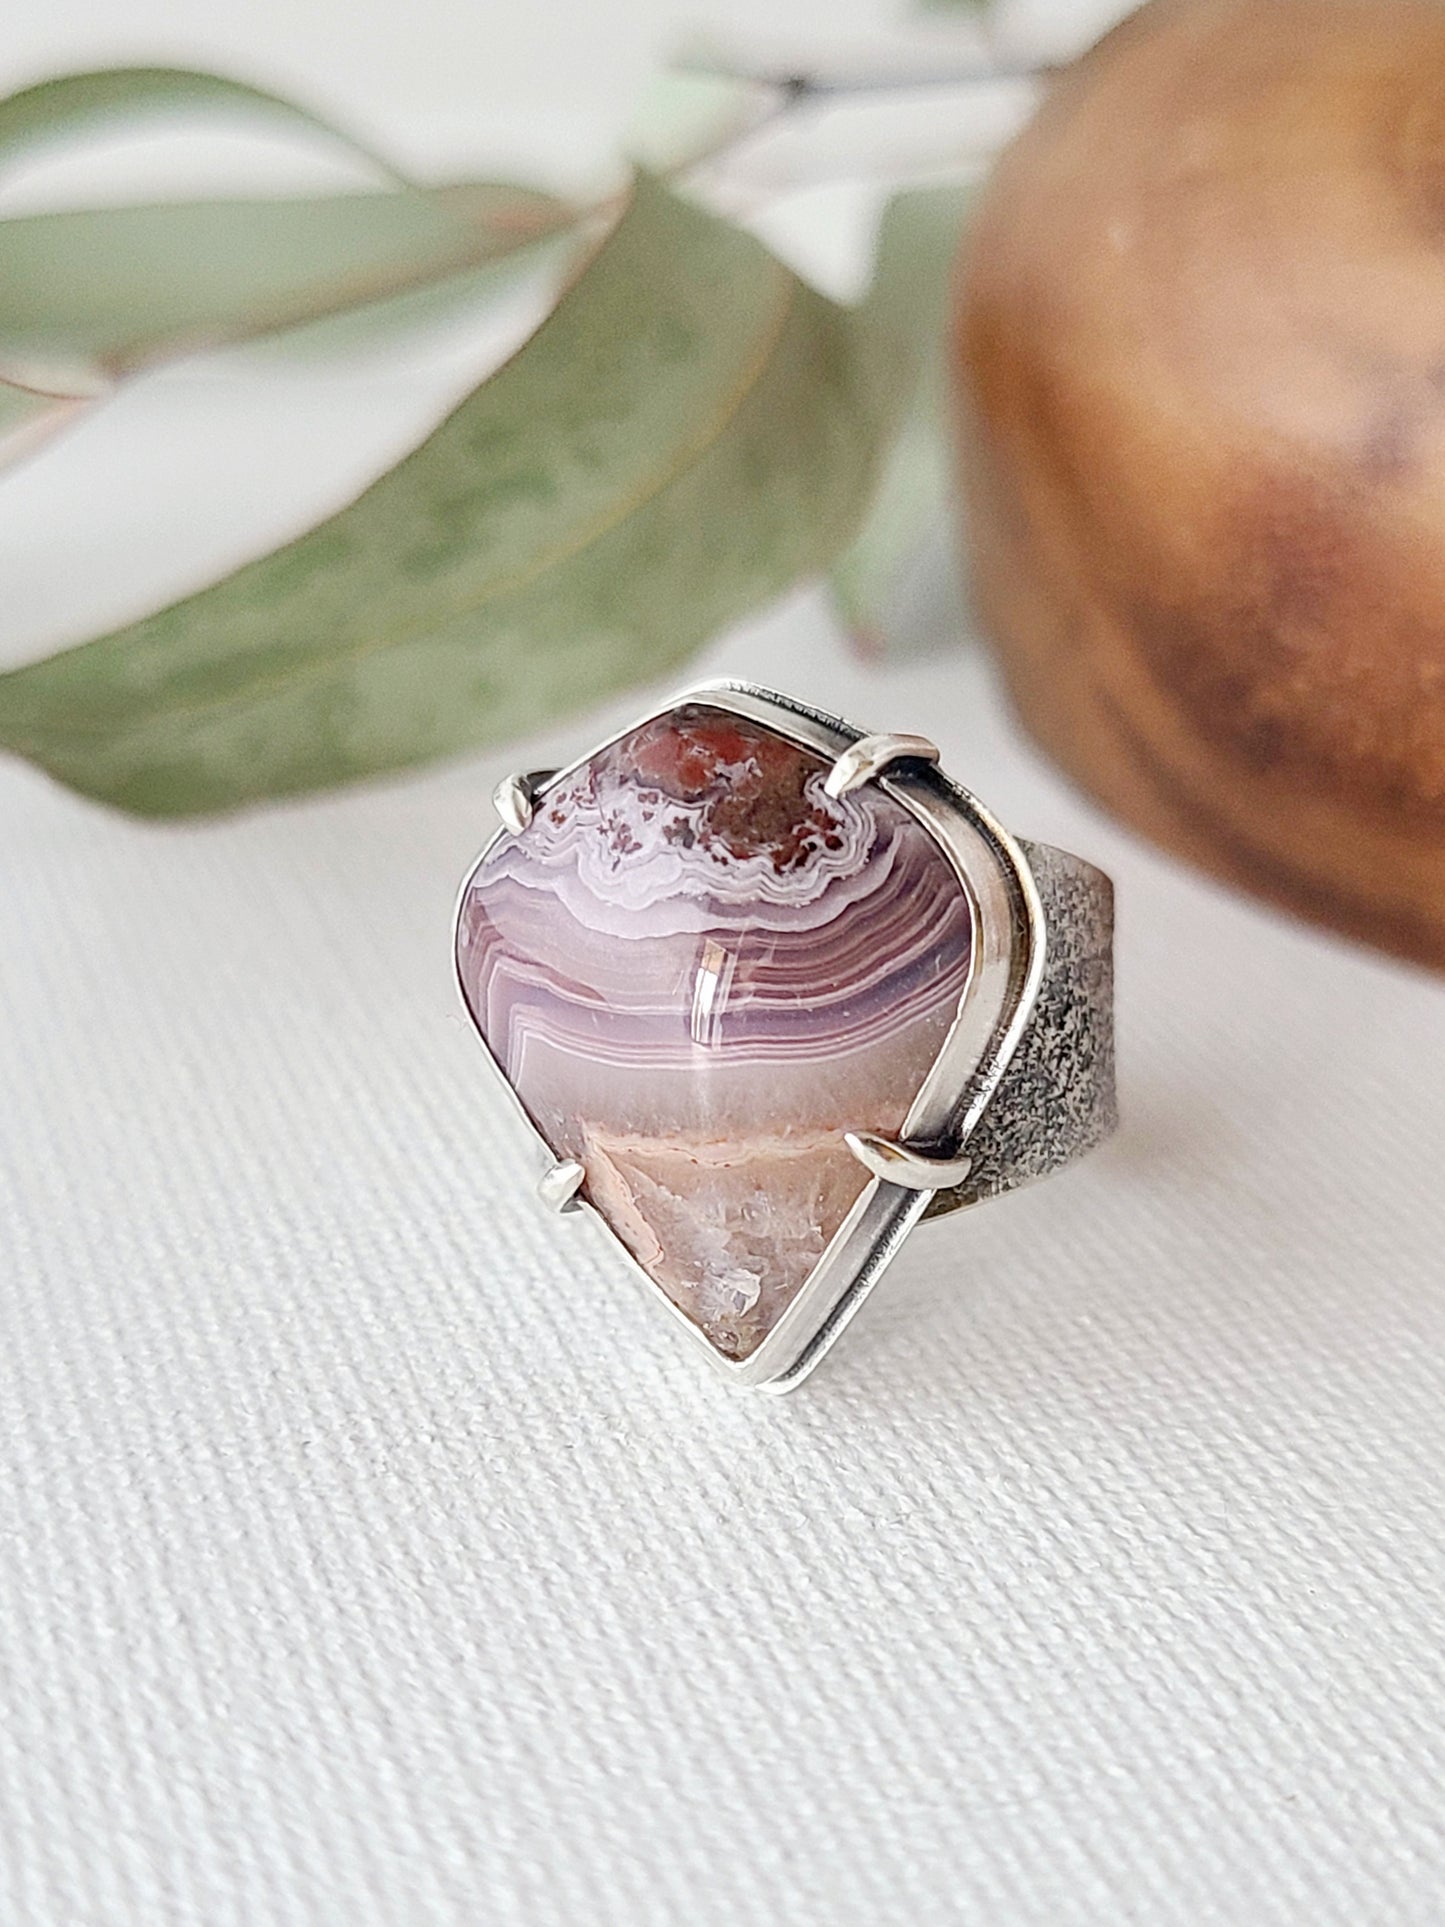 Desert Canyon Ring with Laguna Lace Agate-size 8.5 US